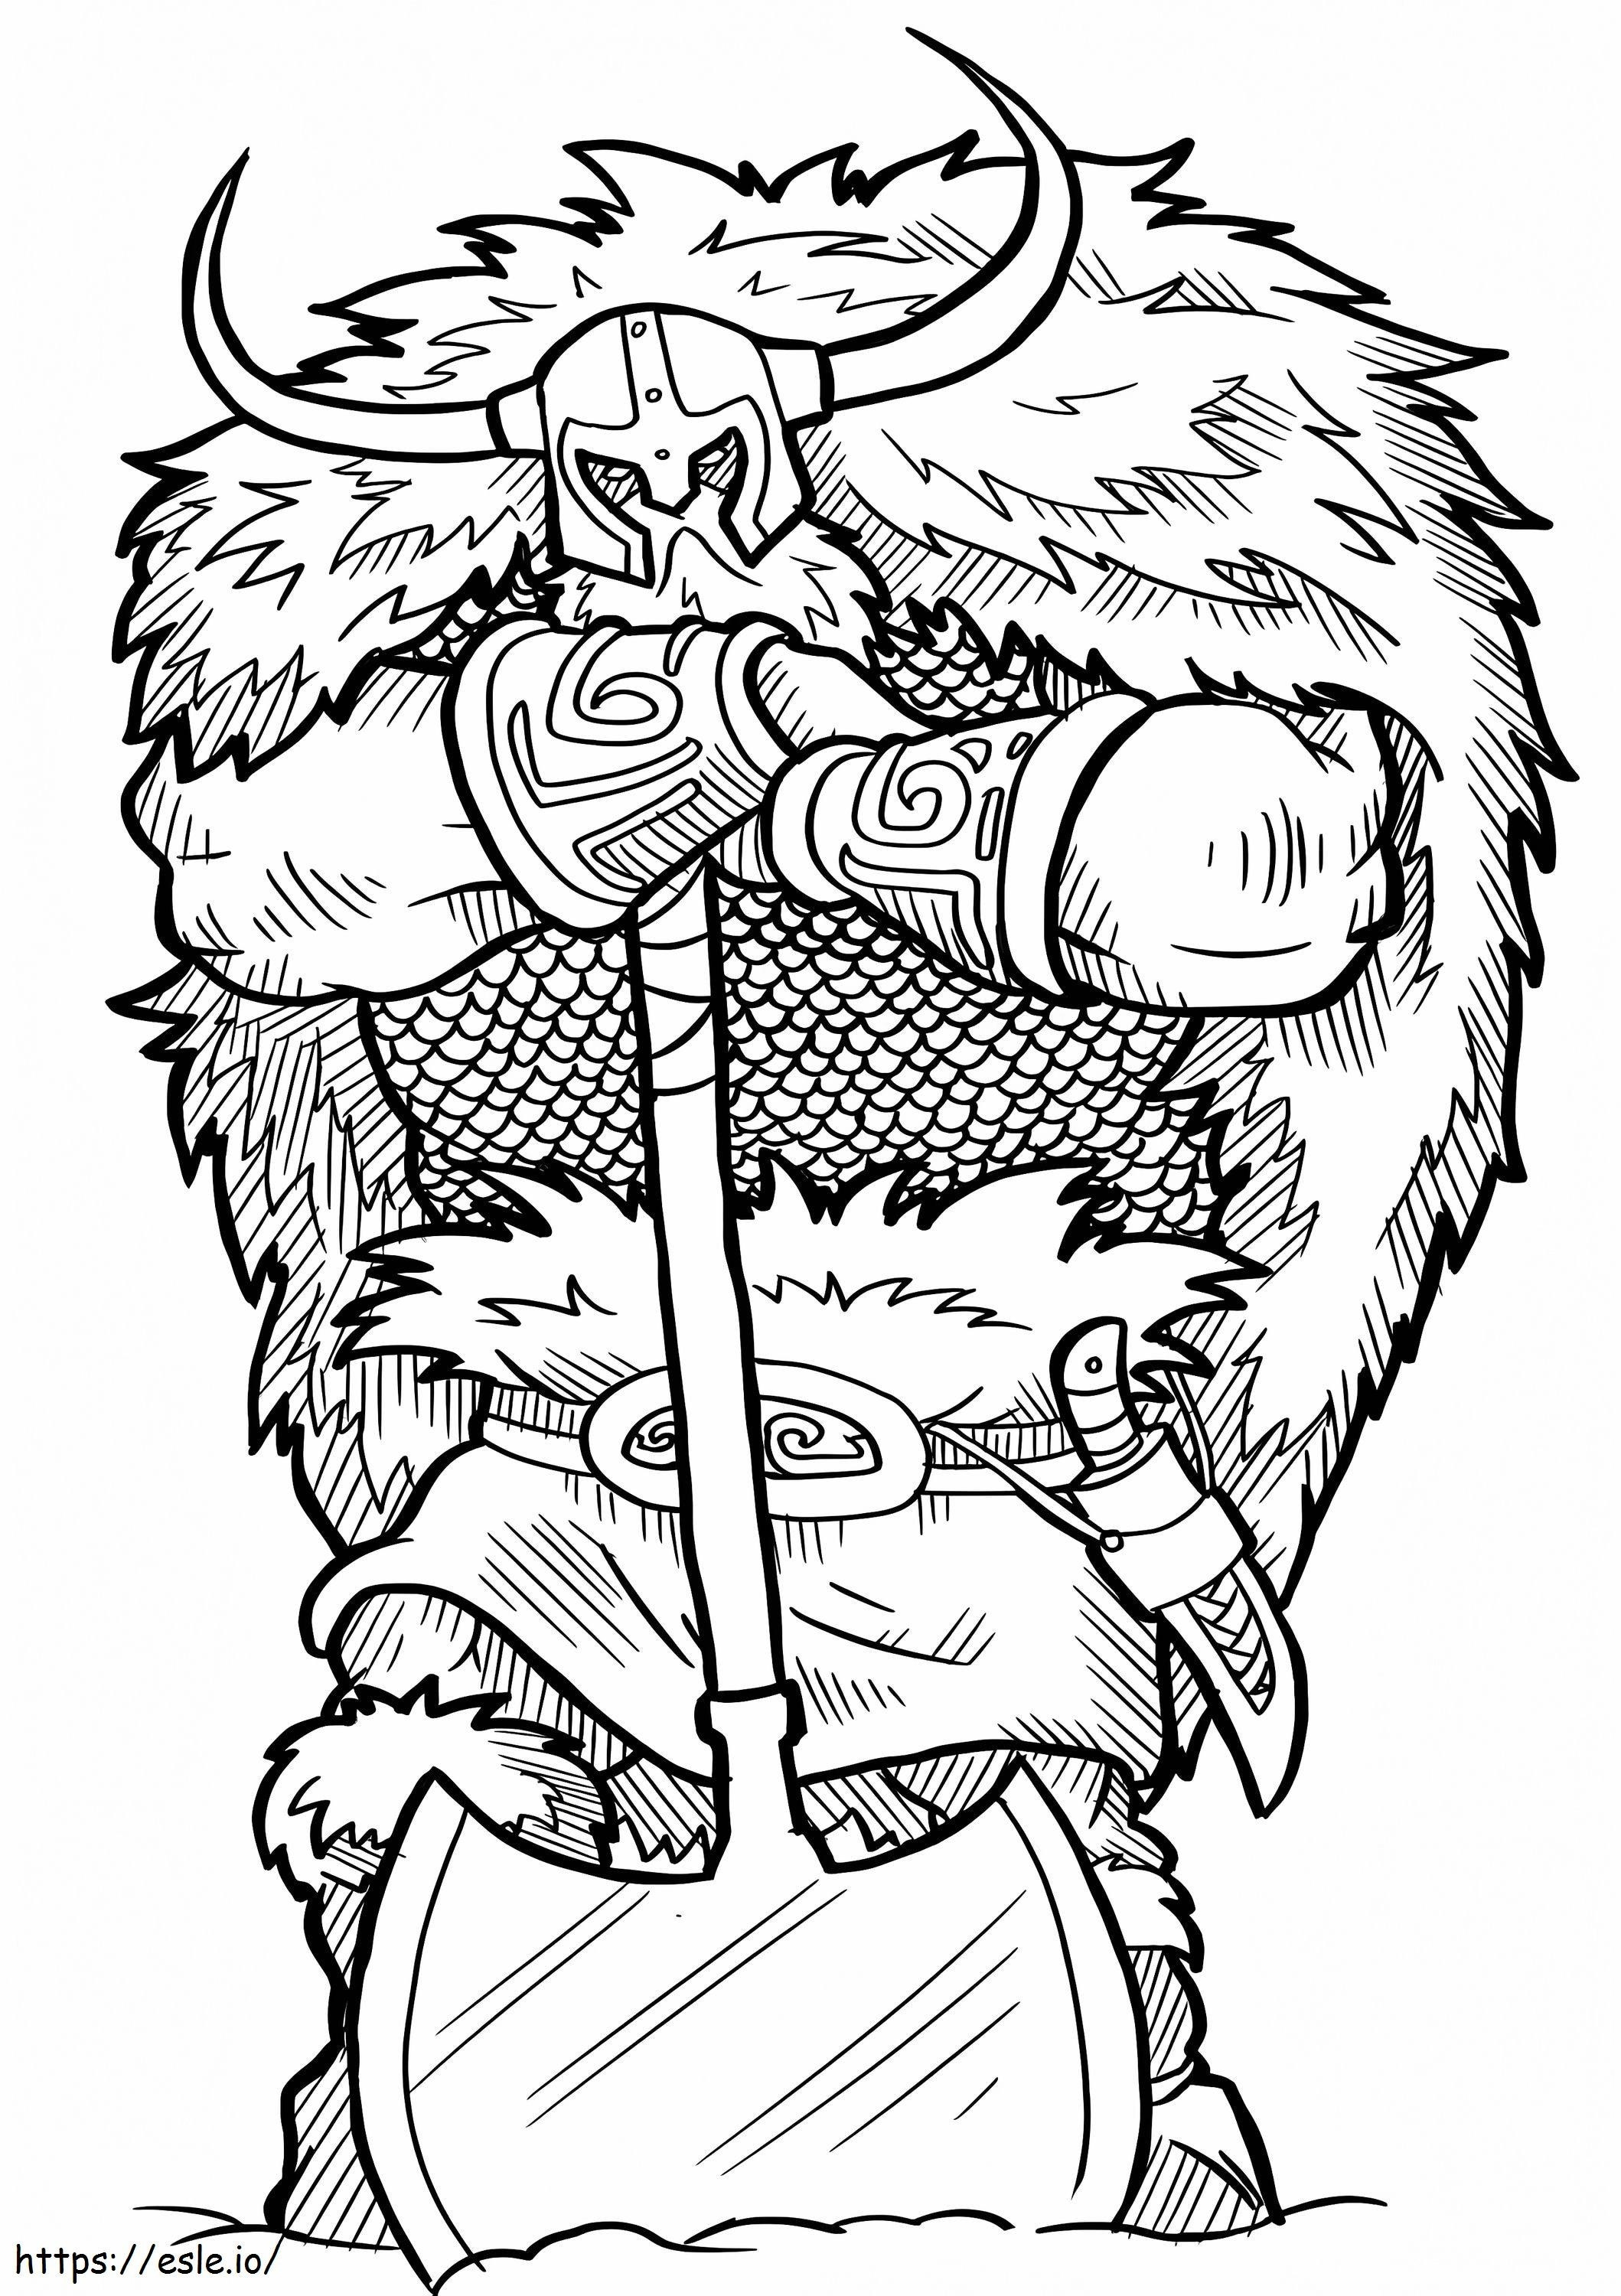 Viking With Axe coloring page